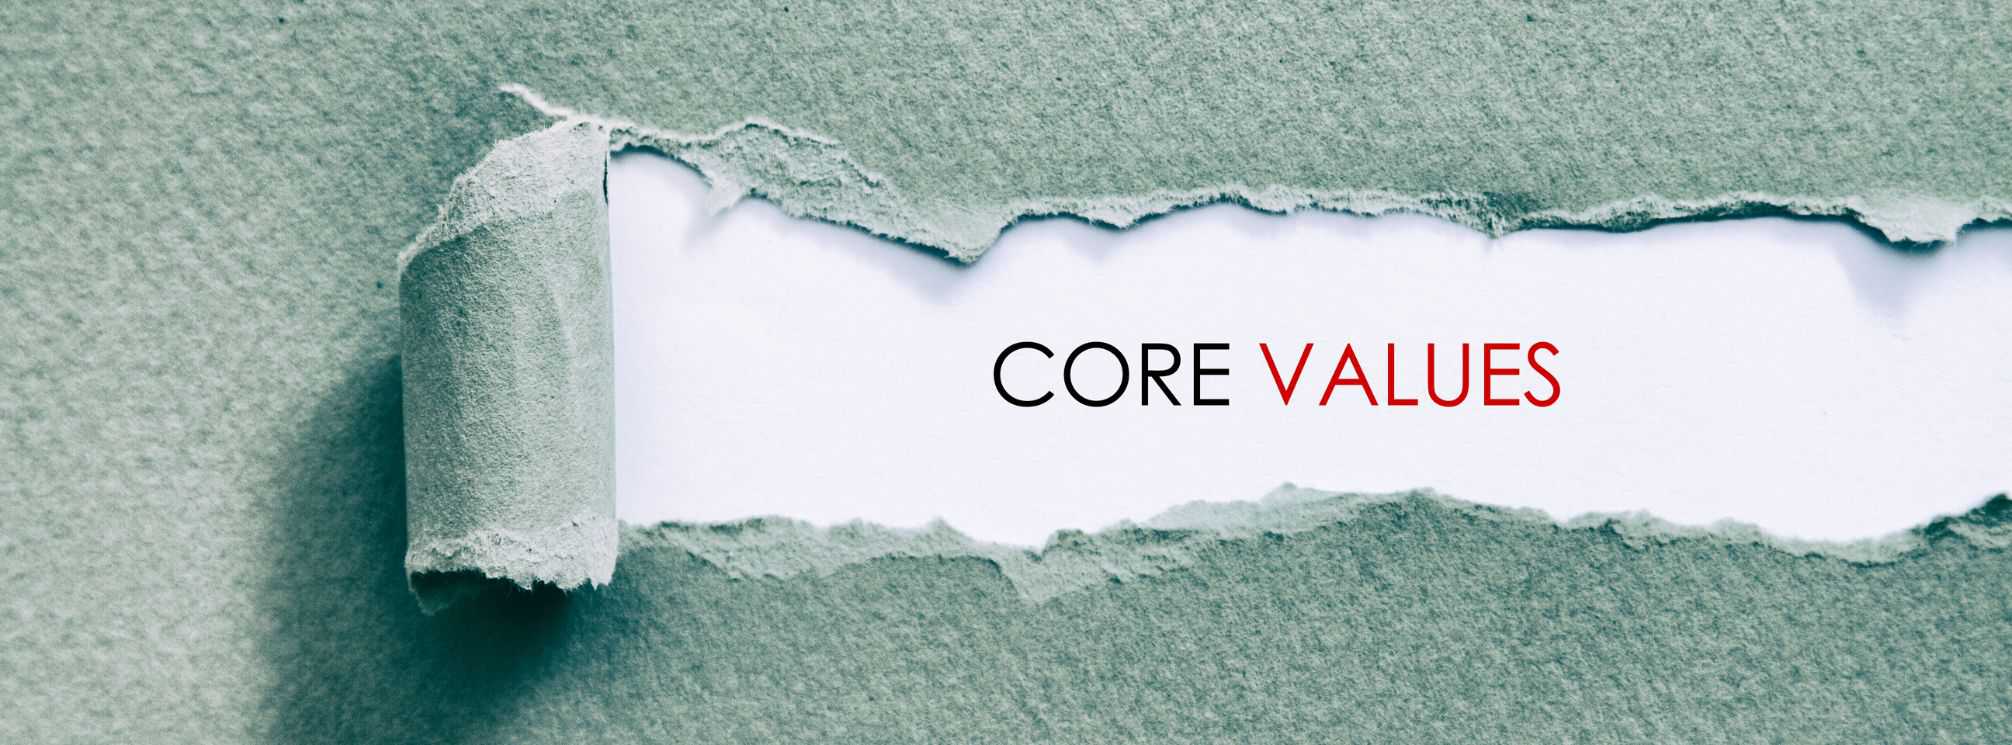 Piece of paper torn to reveal the words "core values" underneath.